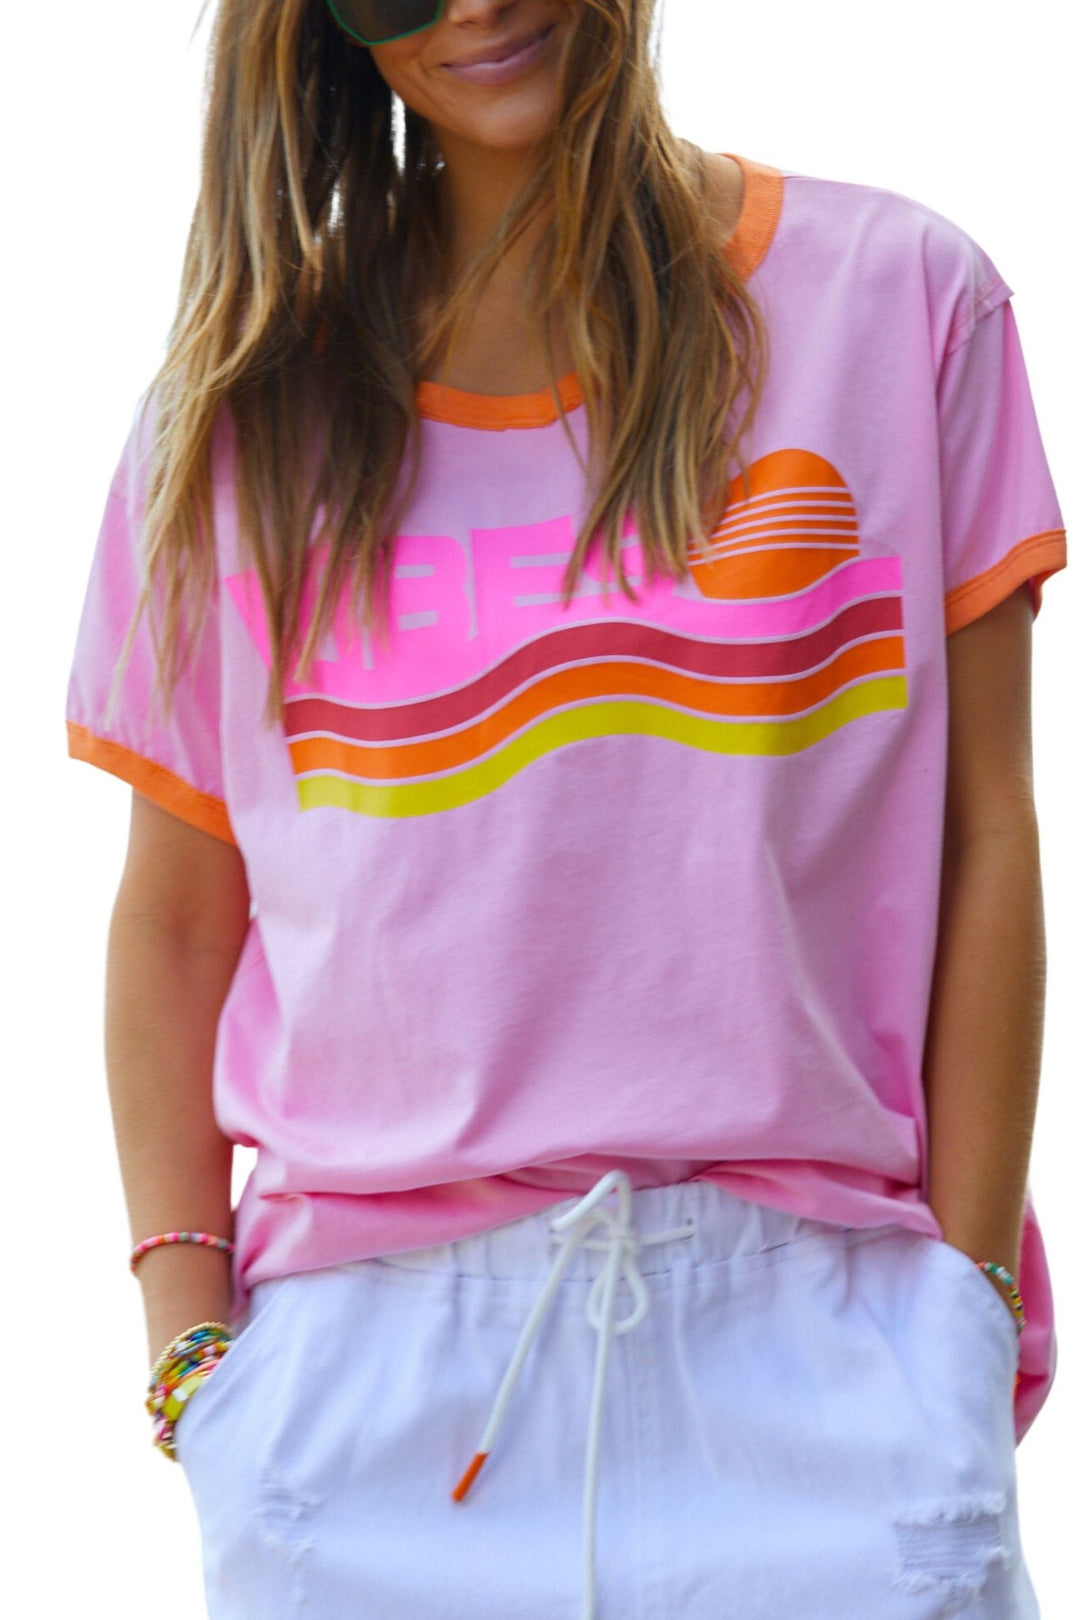 Retro Vibes Pink T Shirt - Since I Found You